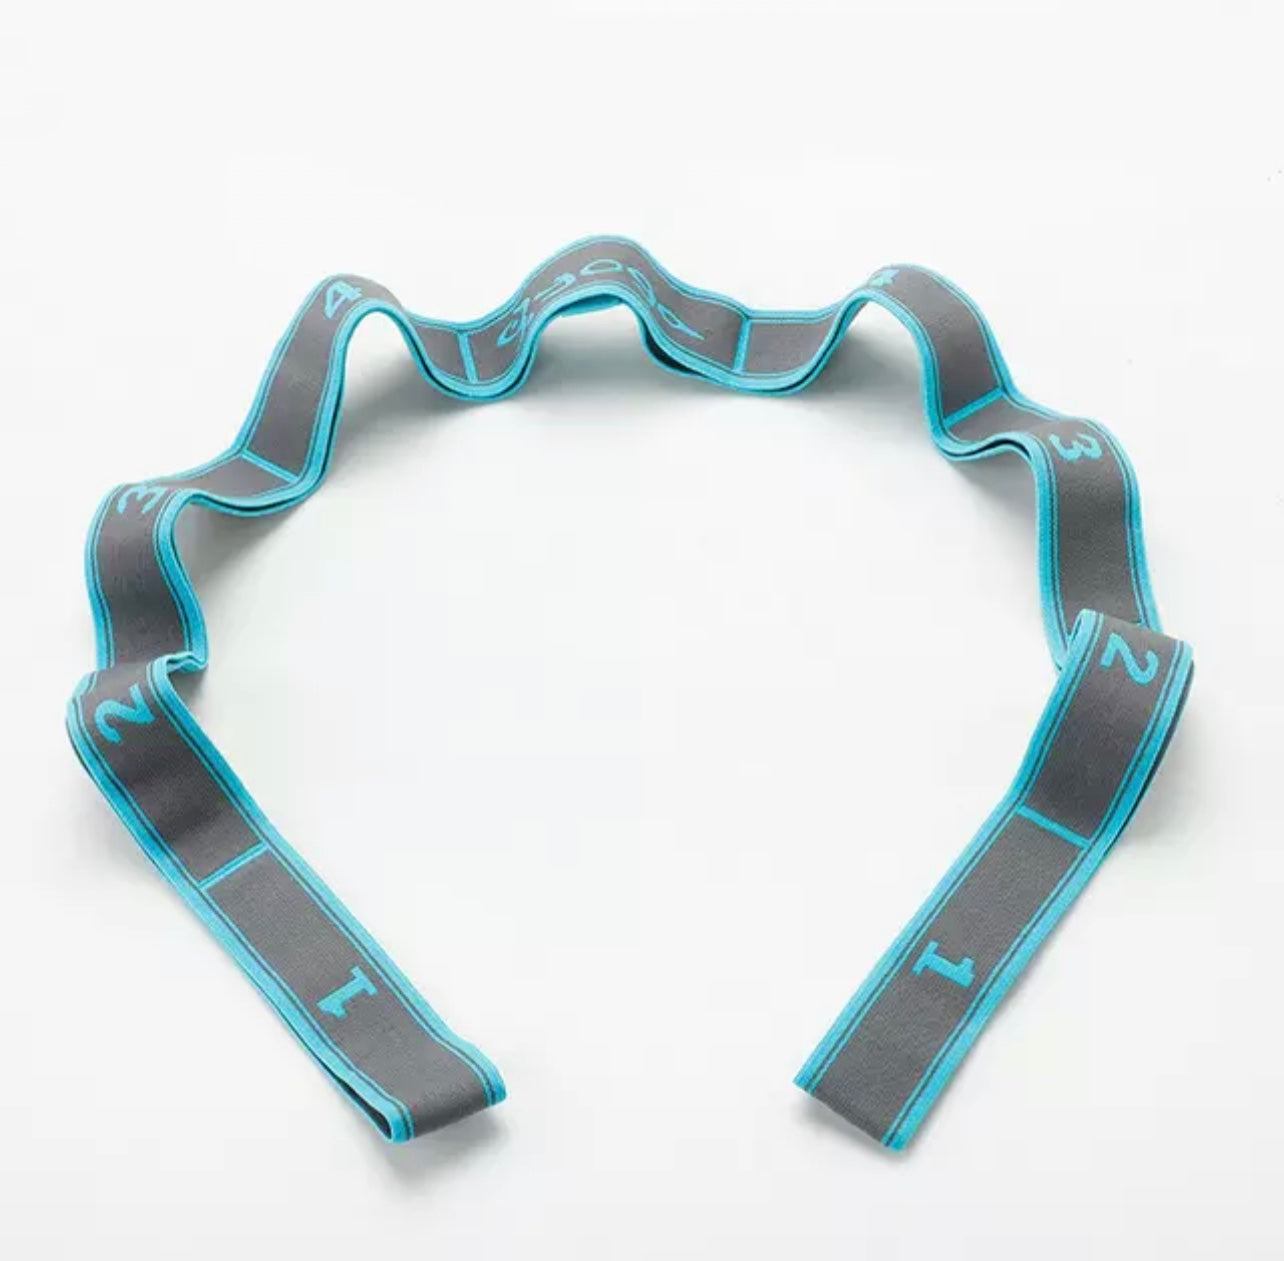 Multi Function Flexibility Resistance Band - Grey and Blue from The Collective Dancewear